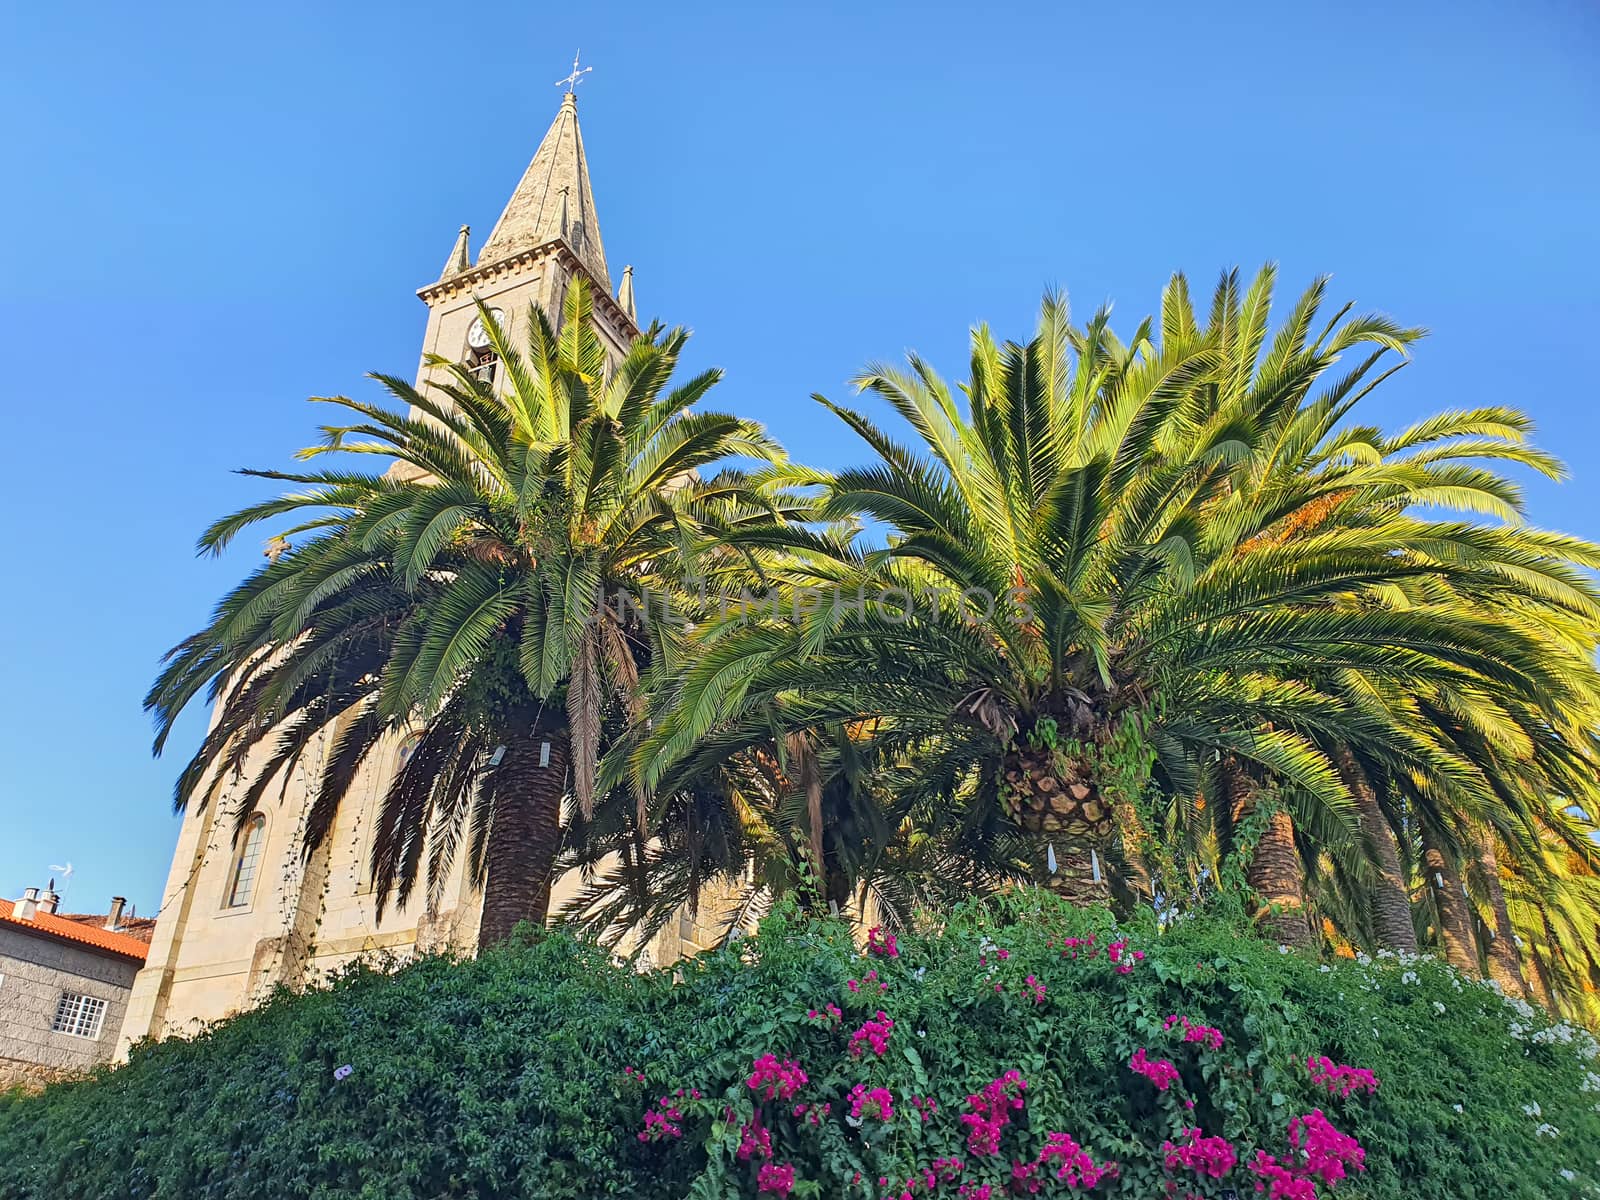 Tropical plants and church tower by savcoco